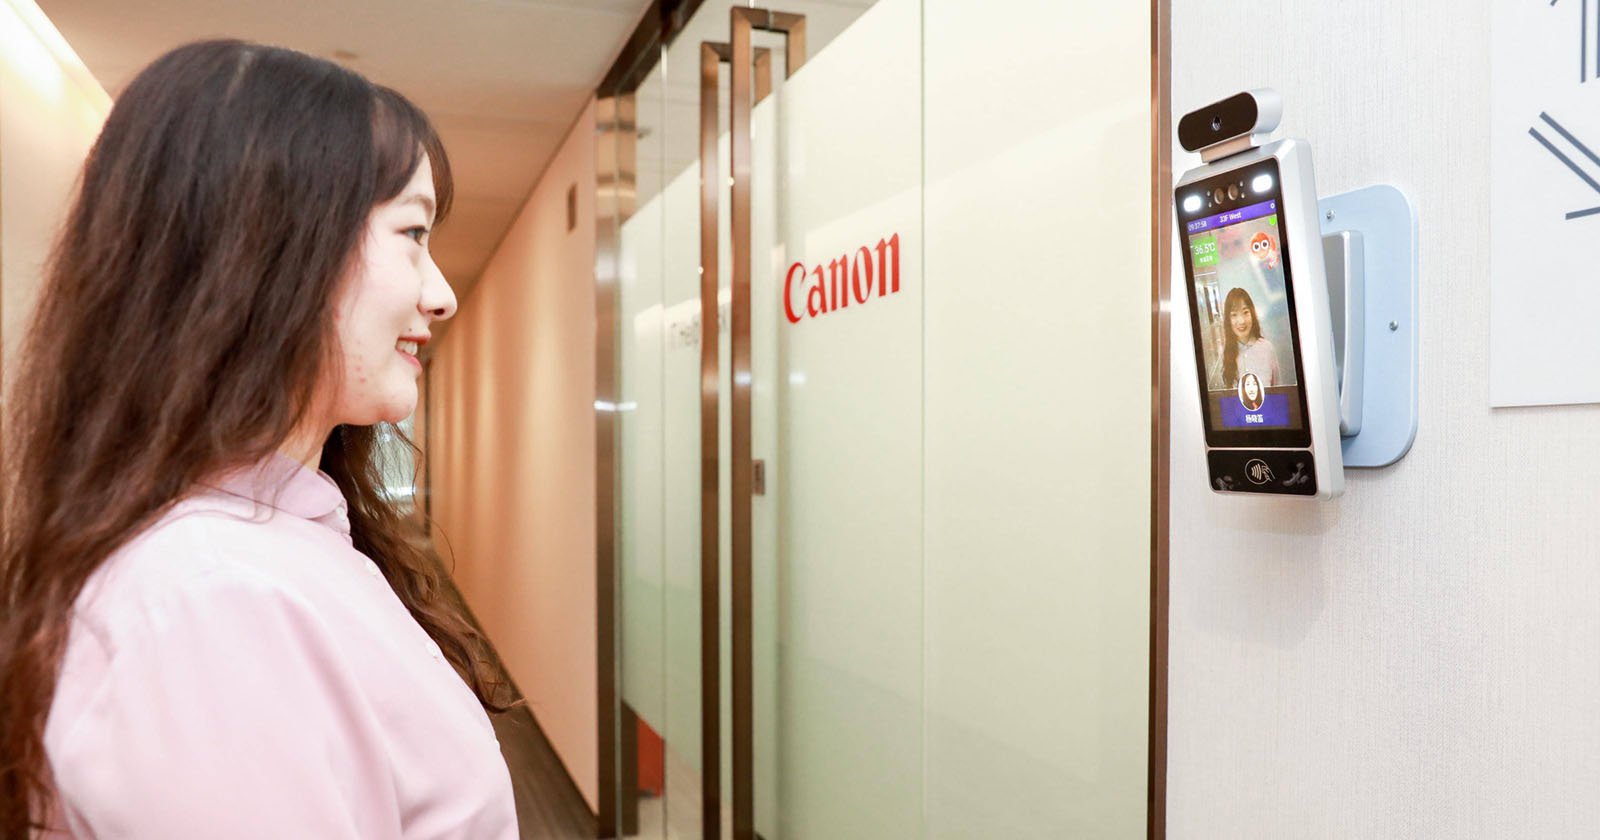 Canon Uses AI Cameras That Only Let Smiling Workers Inside Offices